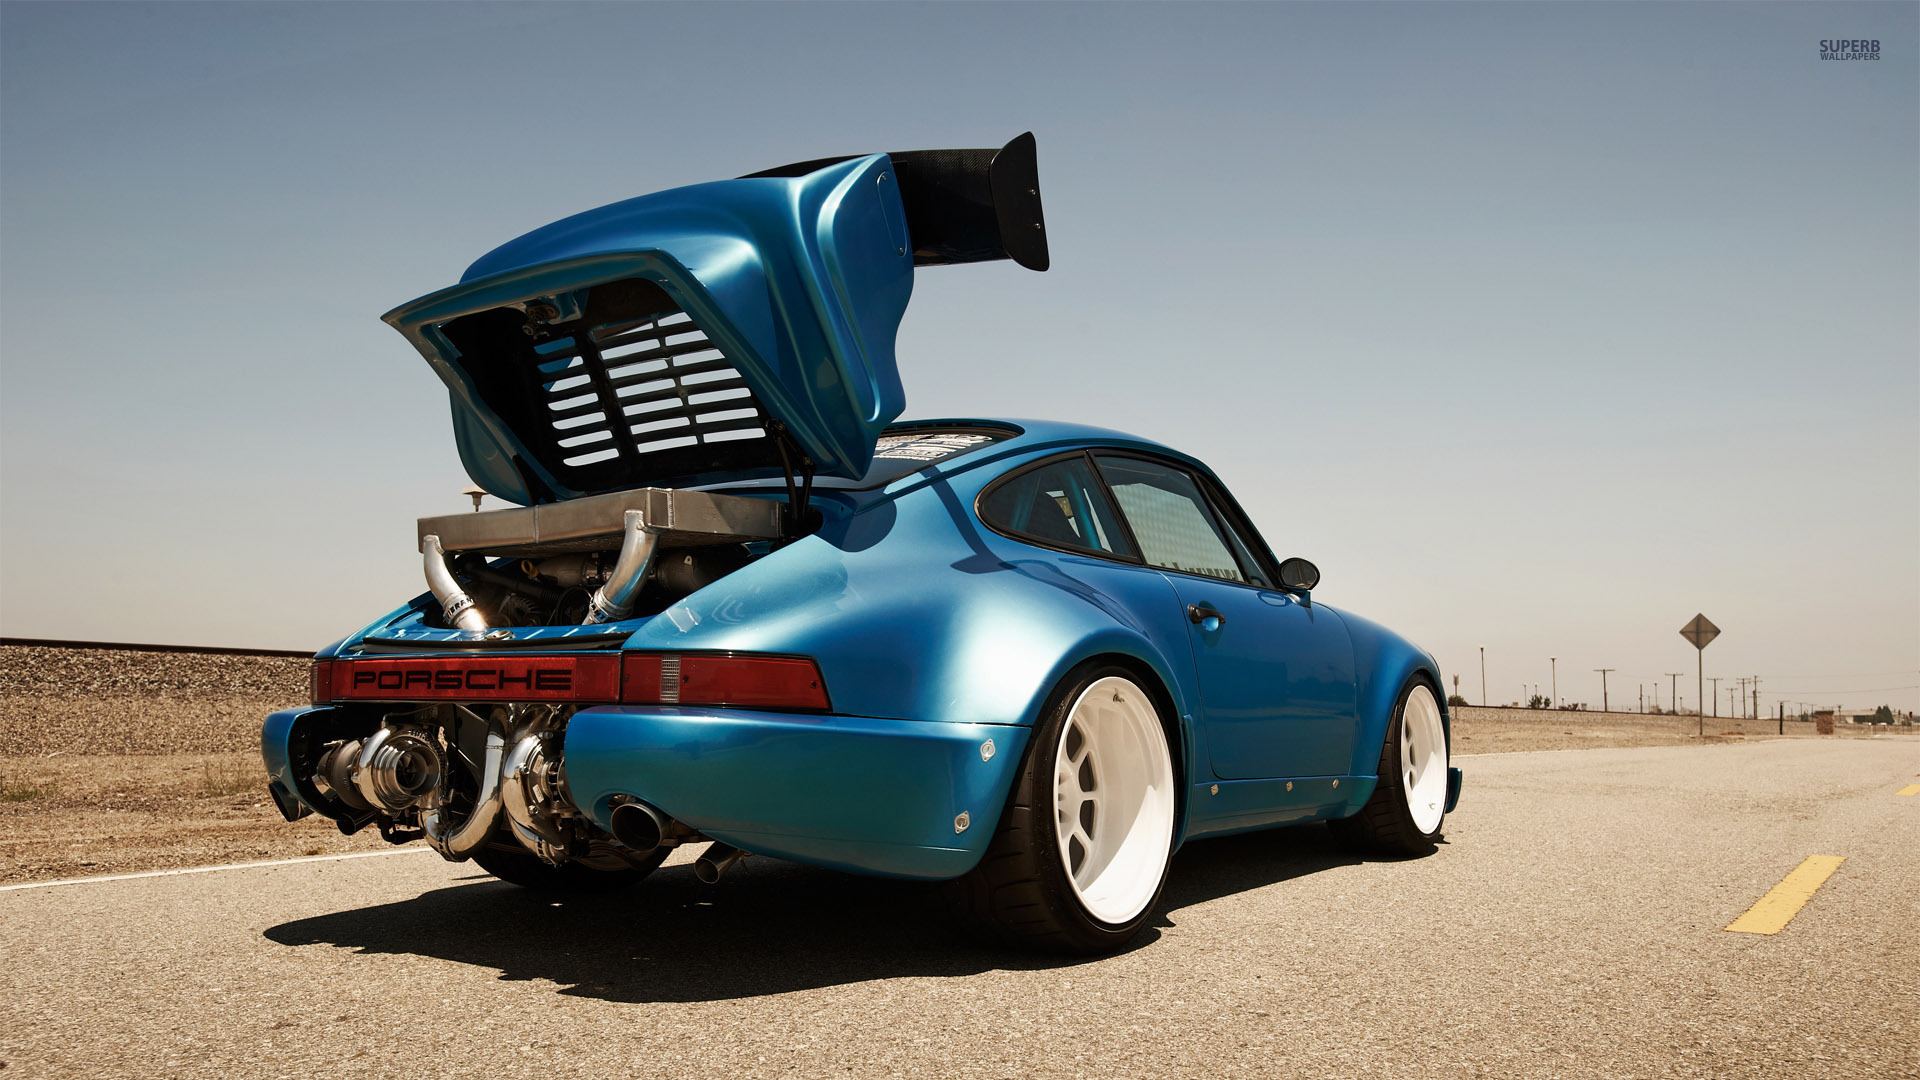 Porsche 930 Wallpapers High Resolution and Quality Download